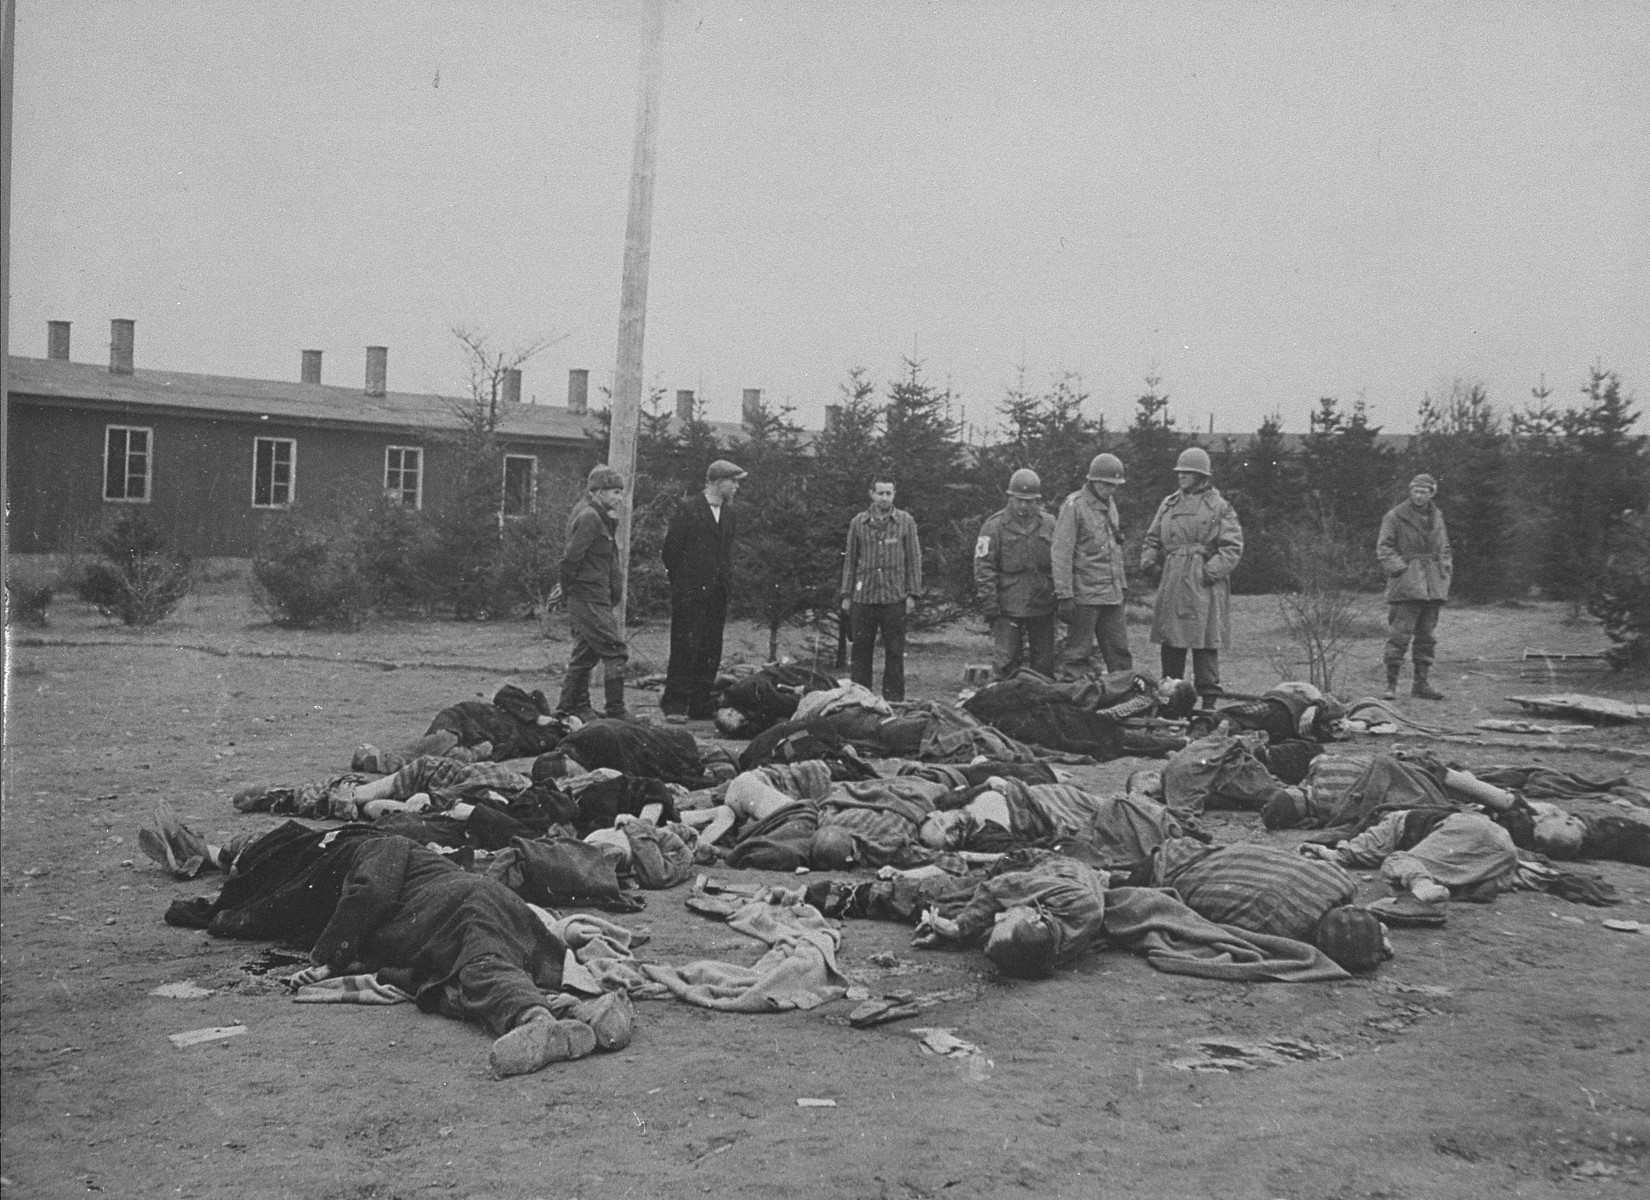 American soldiers and Ohrdruf survivors view the bodies of prisoners who were shot by the SS prior to the evacuation of the camp.